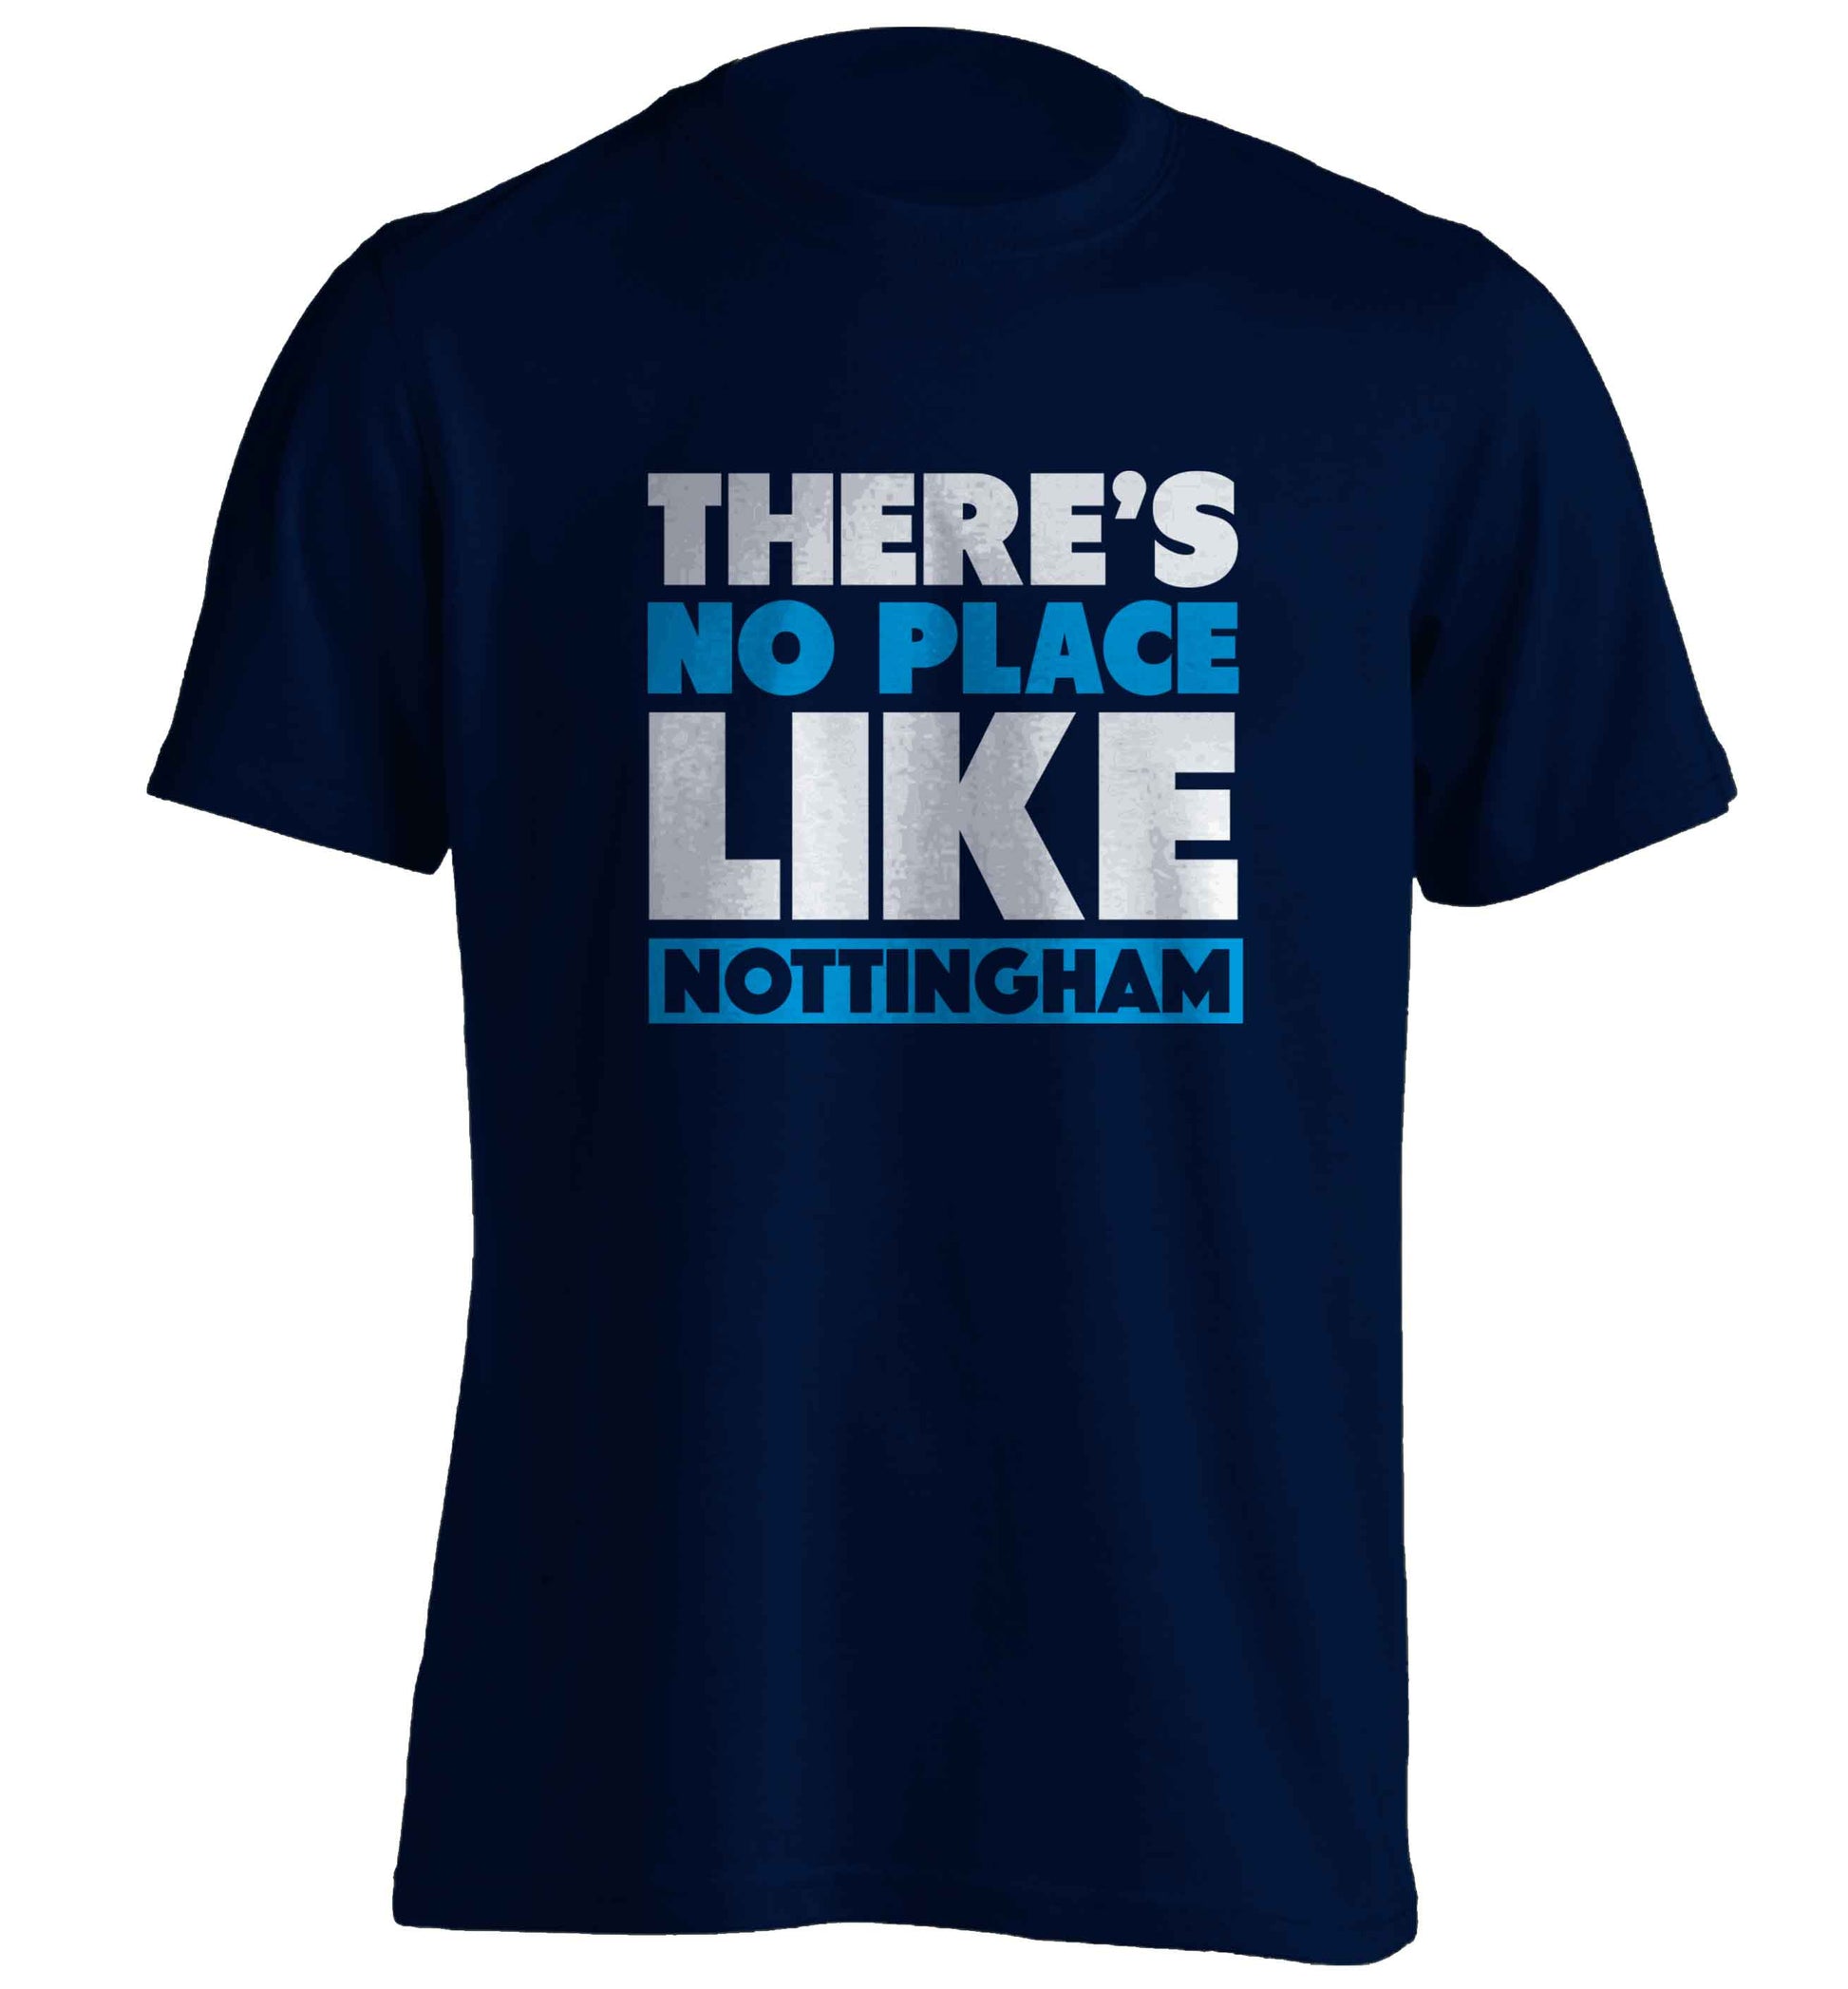 There's no place like Nottingham adults unisex navy Tshirt 2XL